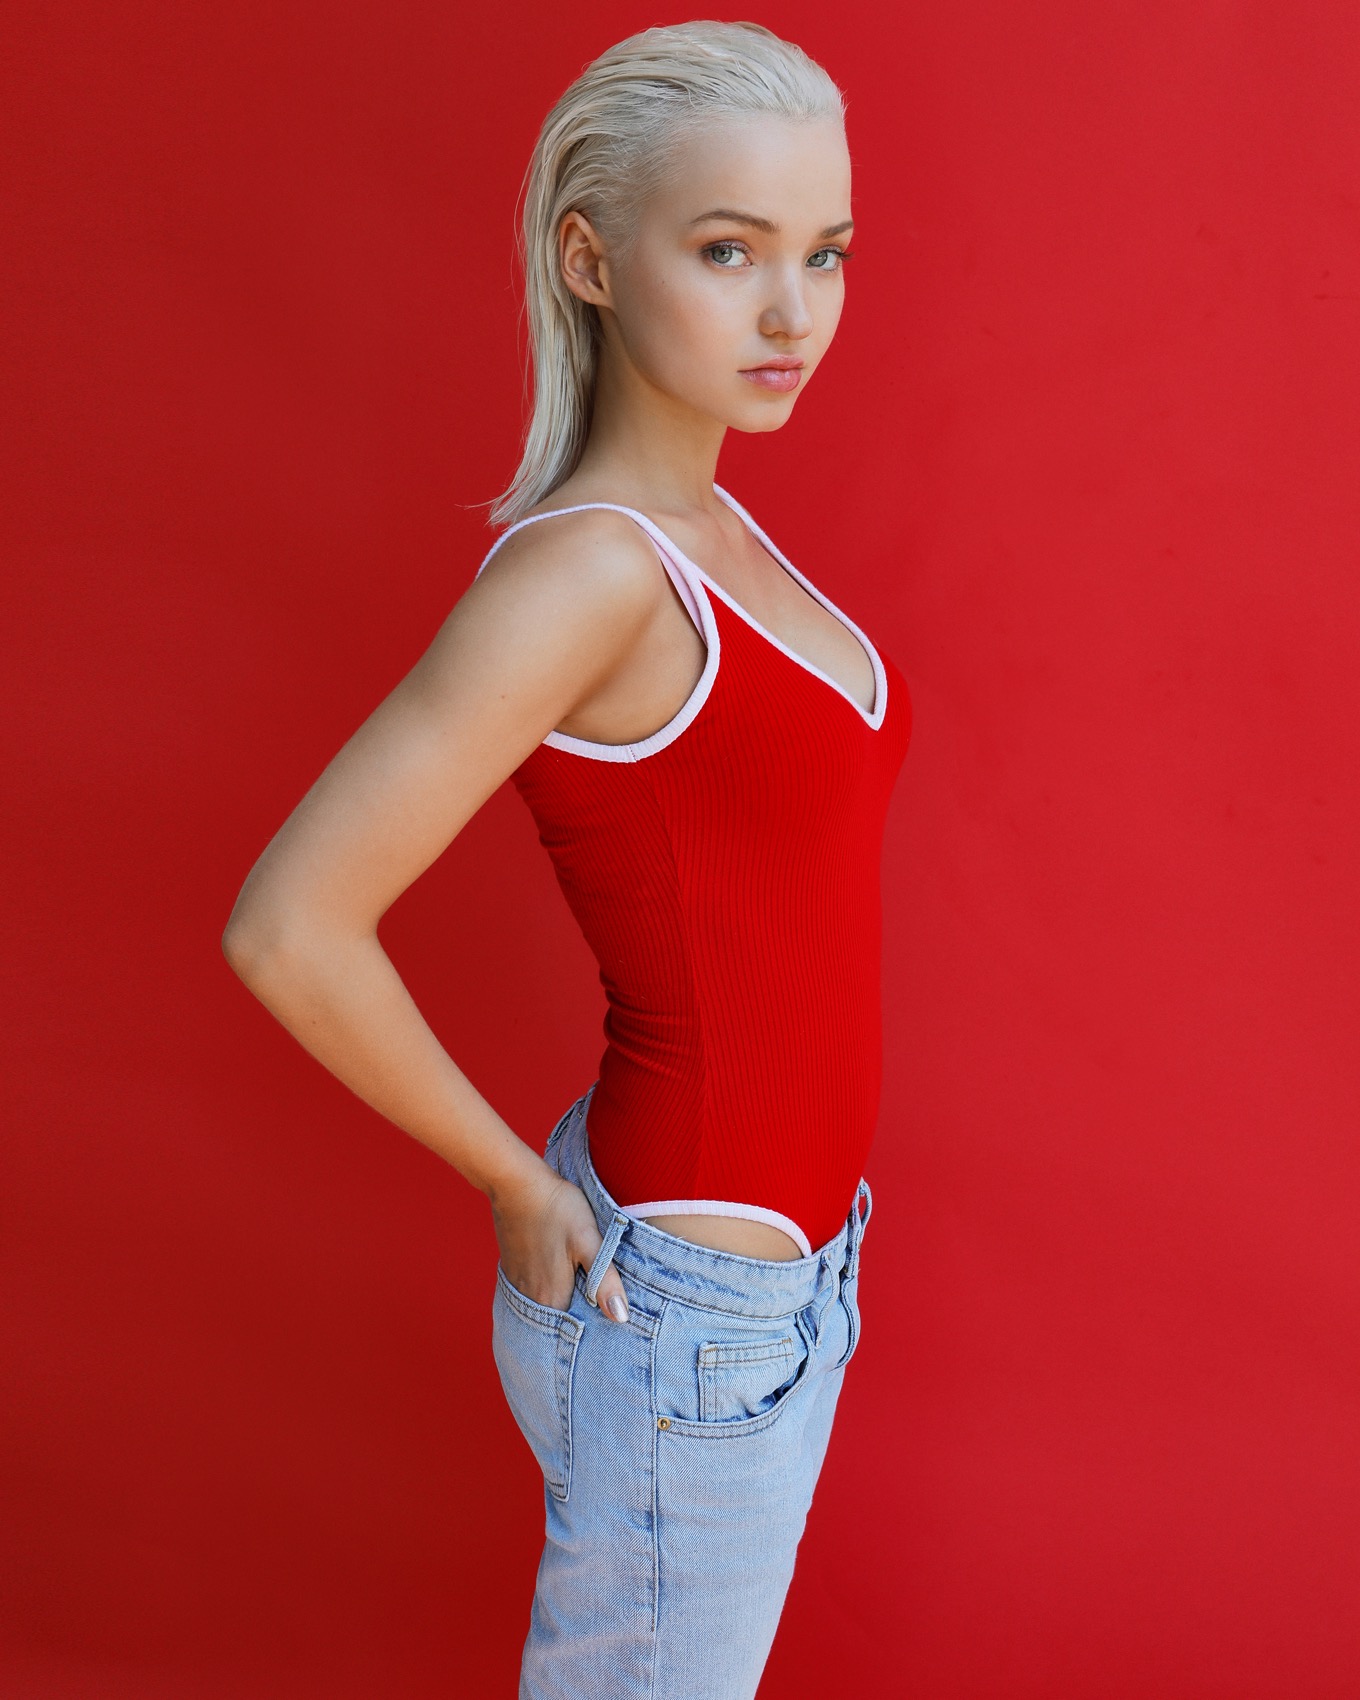 Dove Cameron Women Actress Singer Blonde Green Eyes Jeans Hands In Pockets Red Red Background Profil 1360x1700